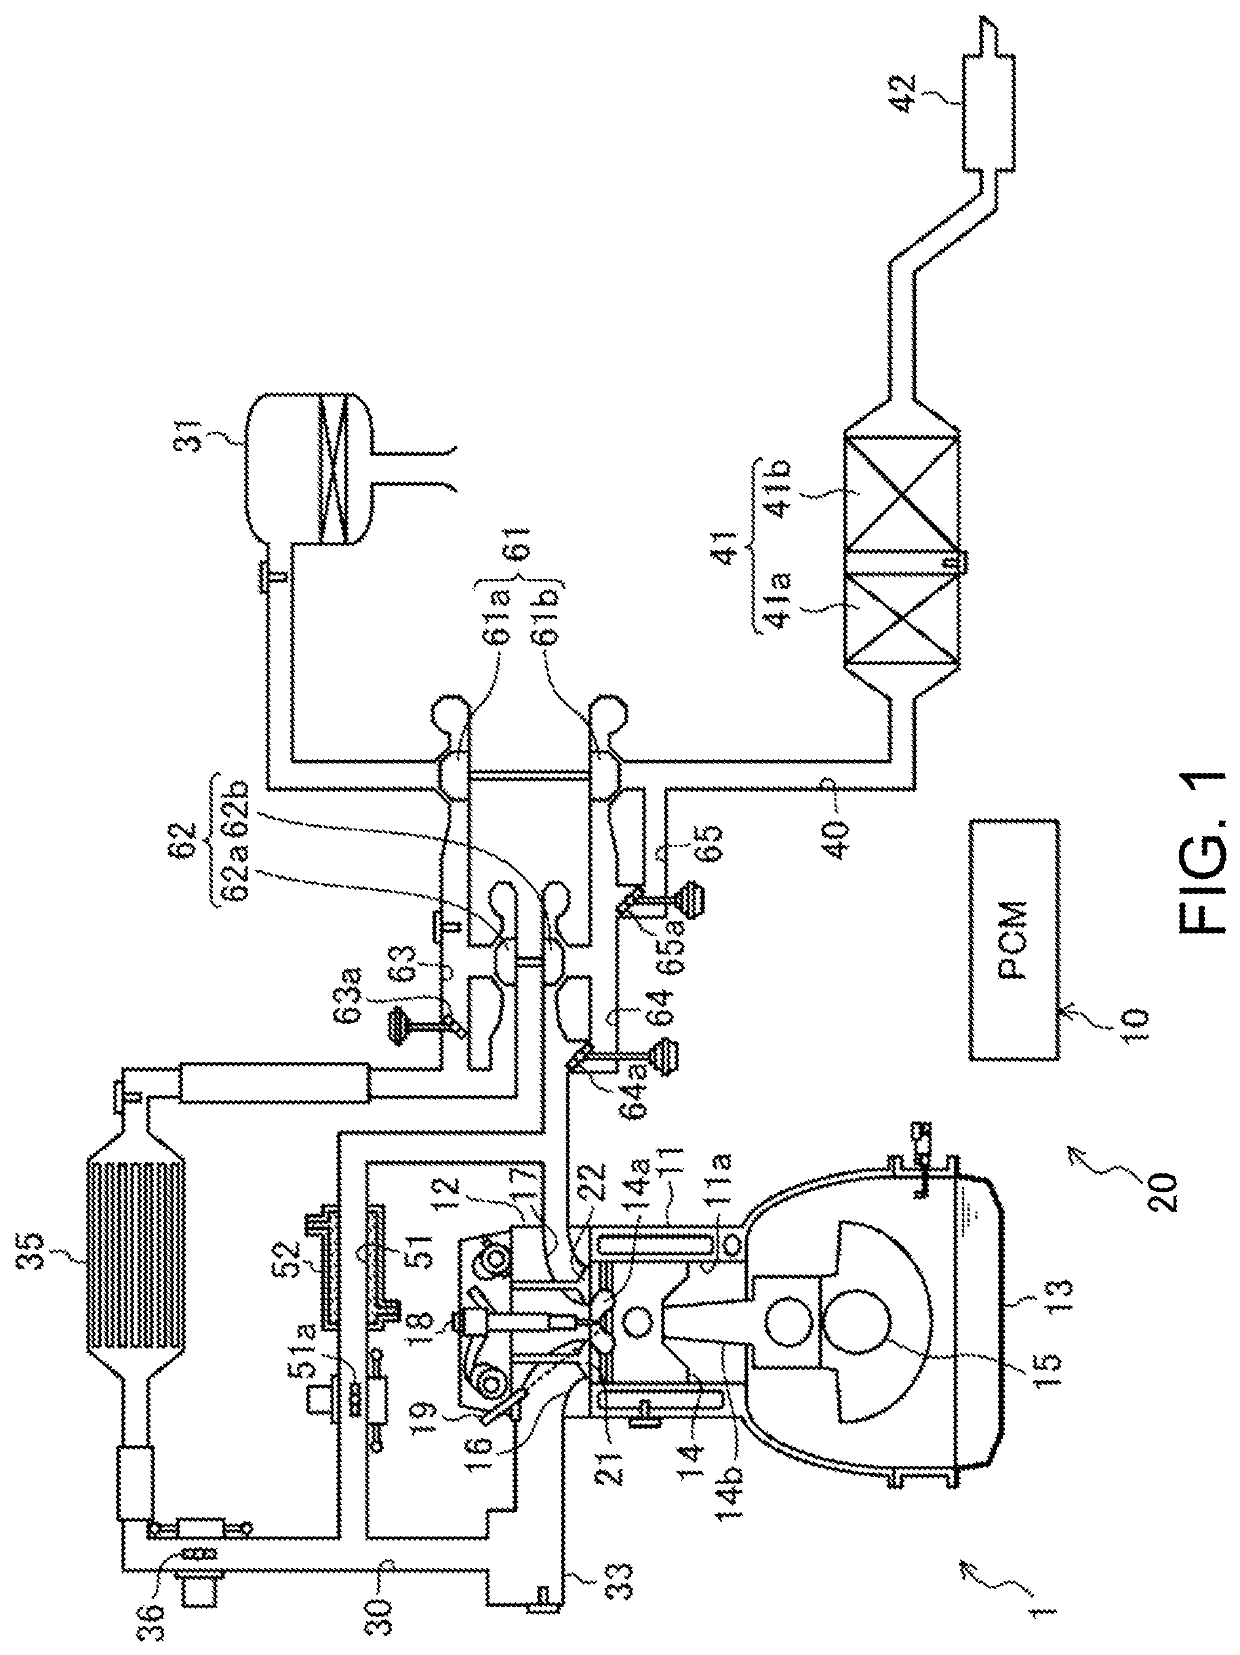 Method and system for controlling engine